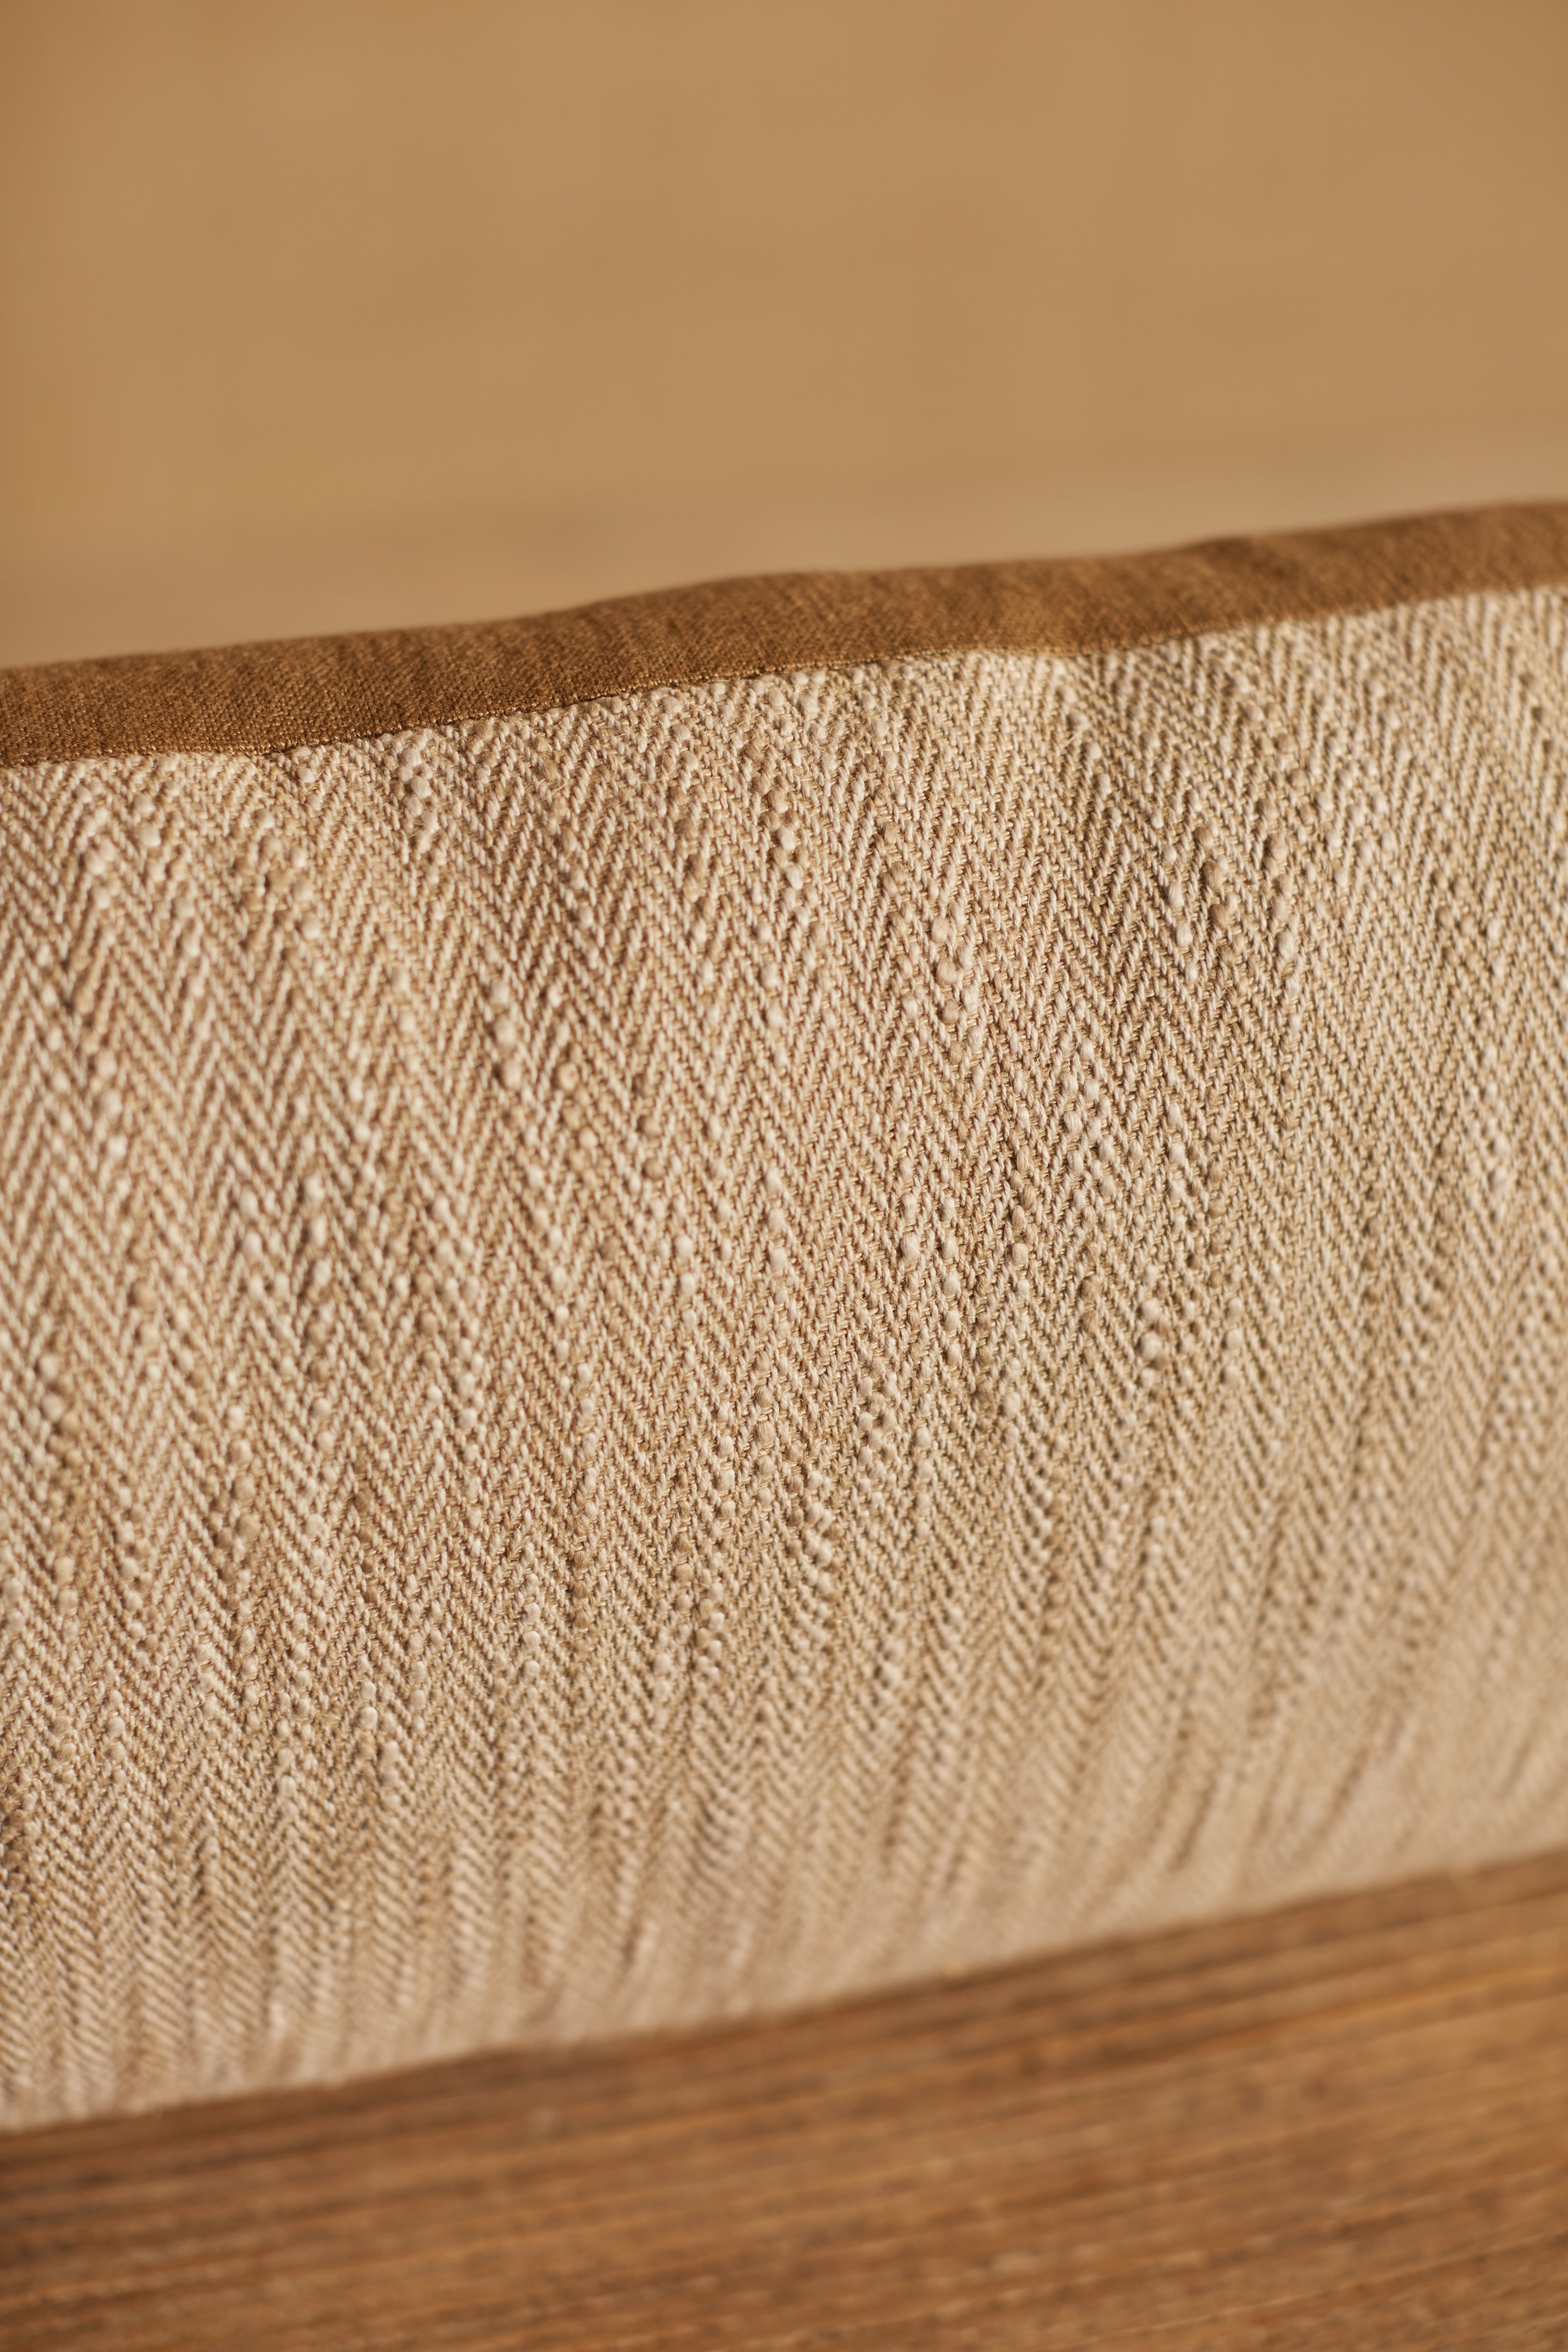 a close up of a piece of fabric on a wooden surface